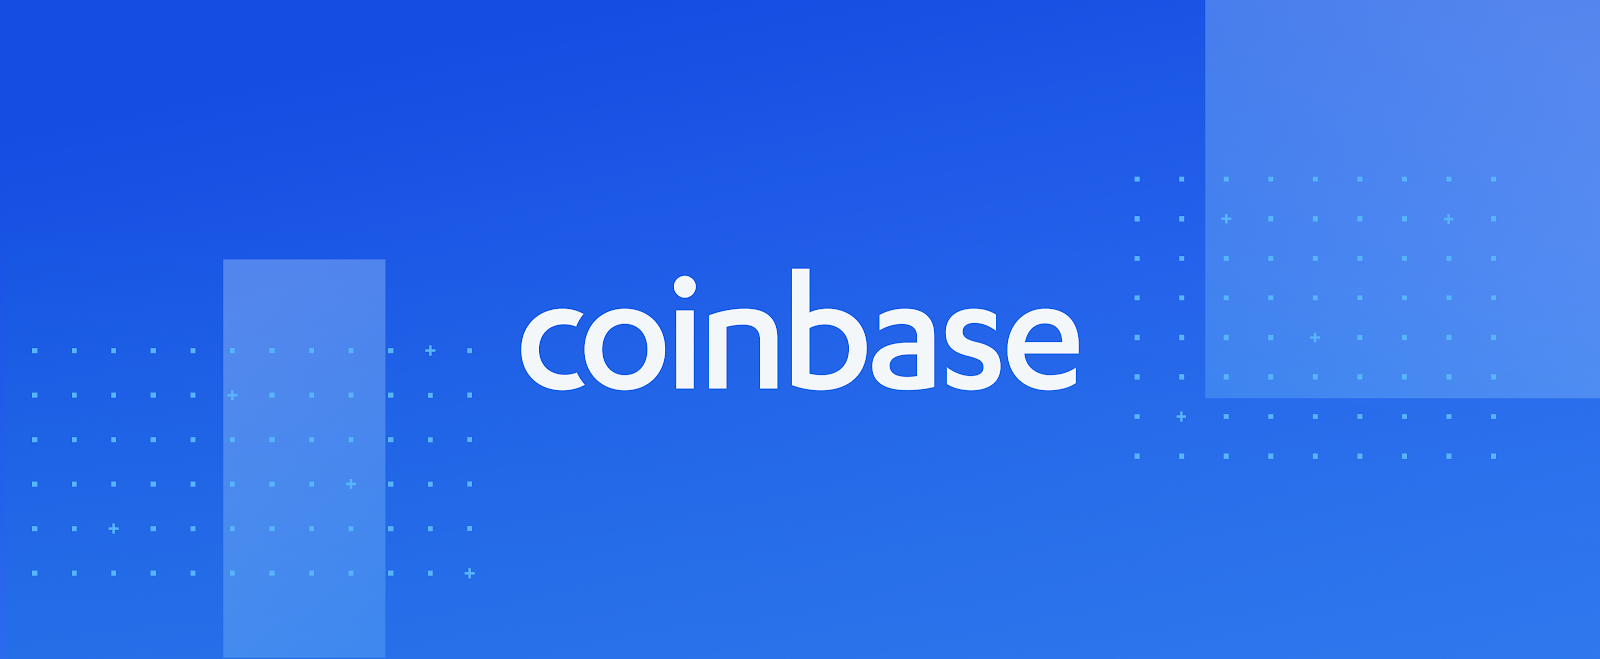 Updated What To Expect During The Bitcoin Cash Hard Fork By Coinbase The Coinbase Blog